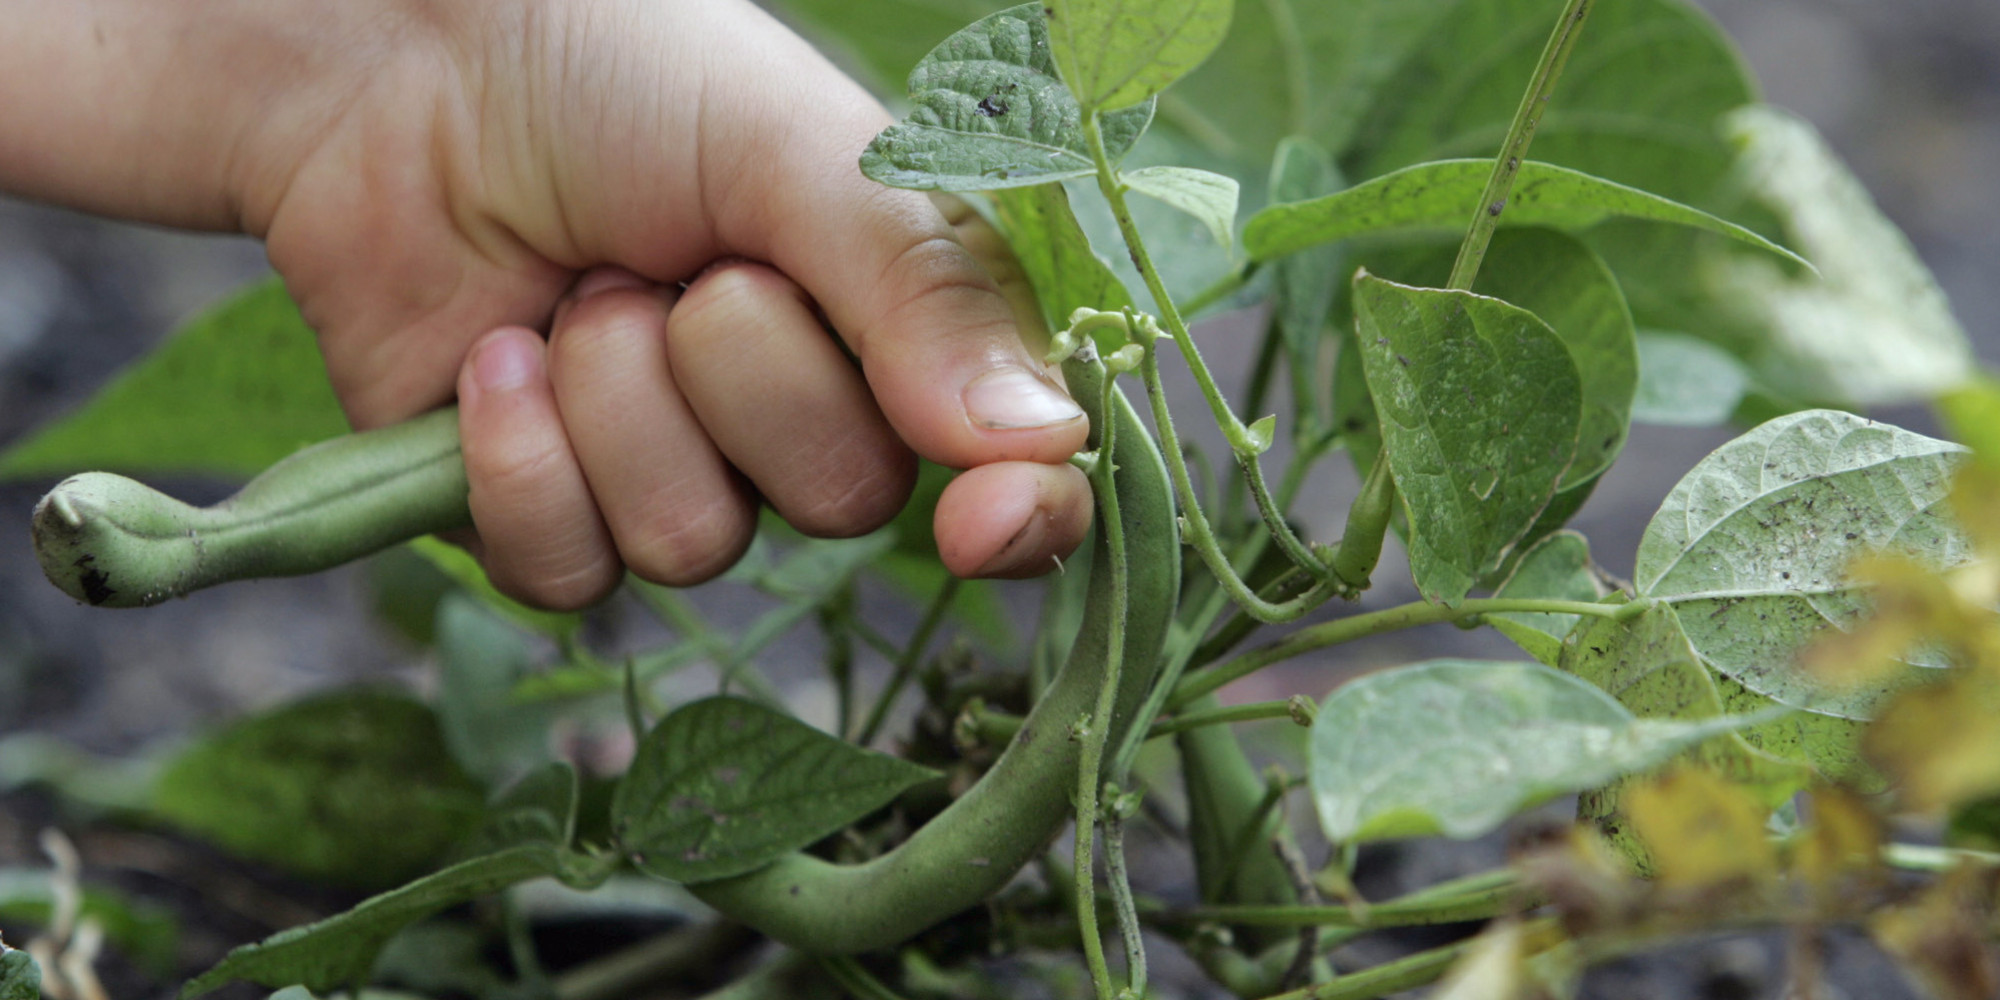 School Gardens Can Help Kids Learn Better And Eat Healthier. So Why Aren't They Everywhere?